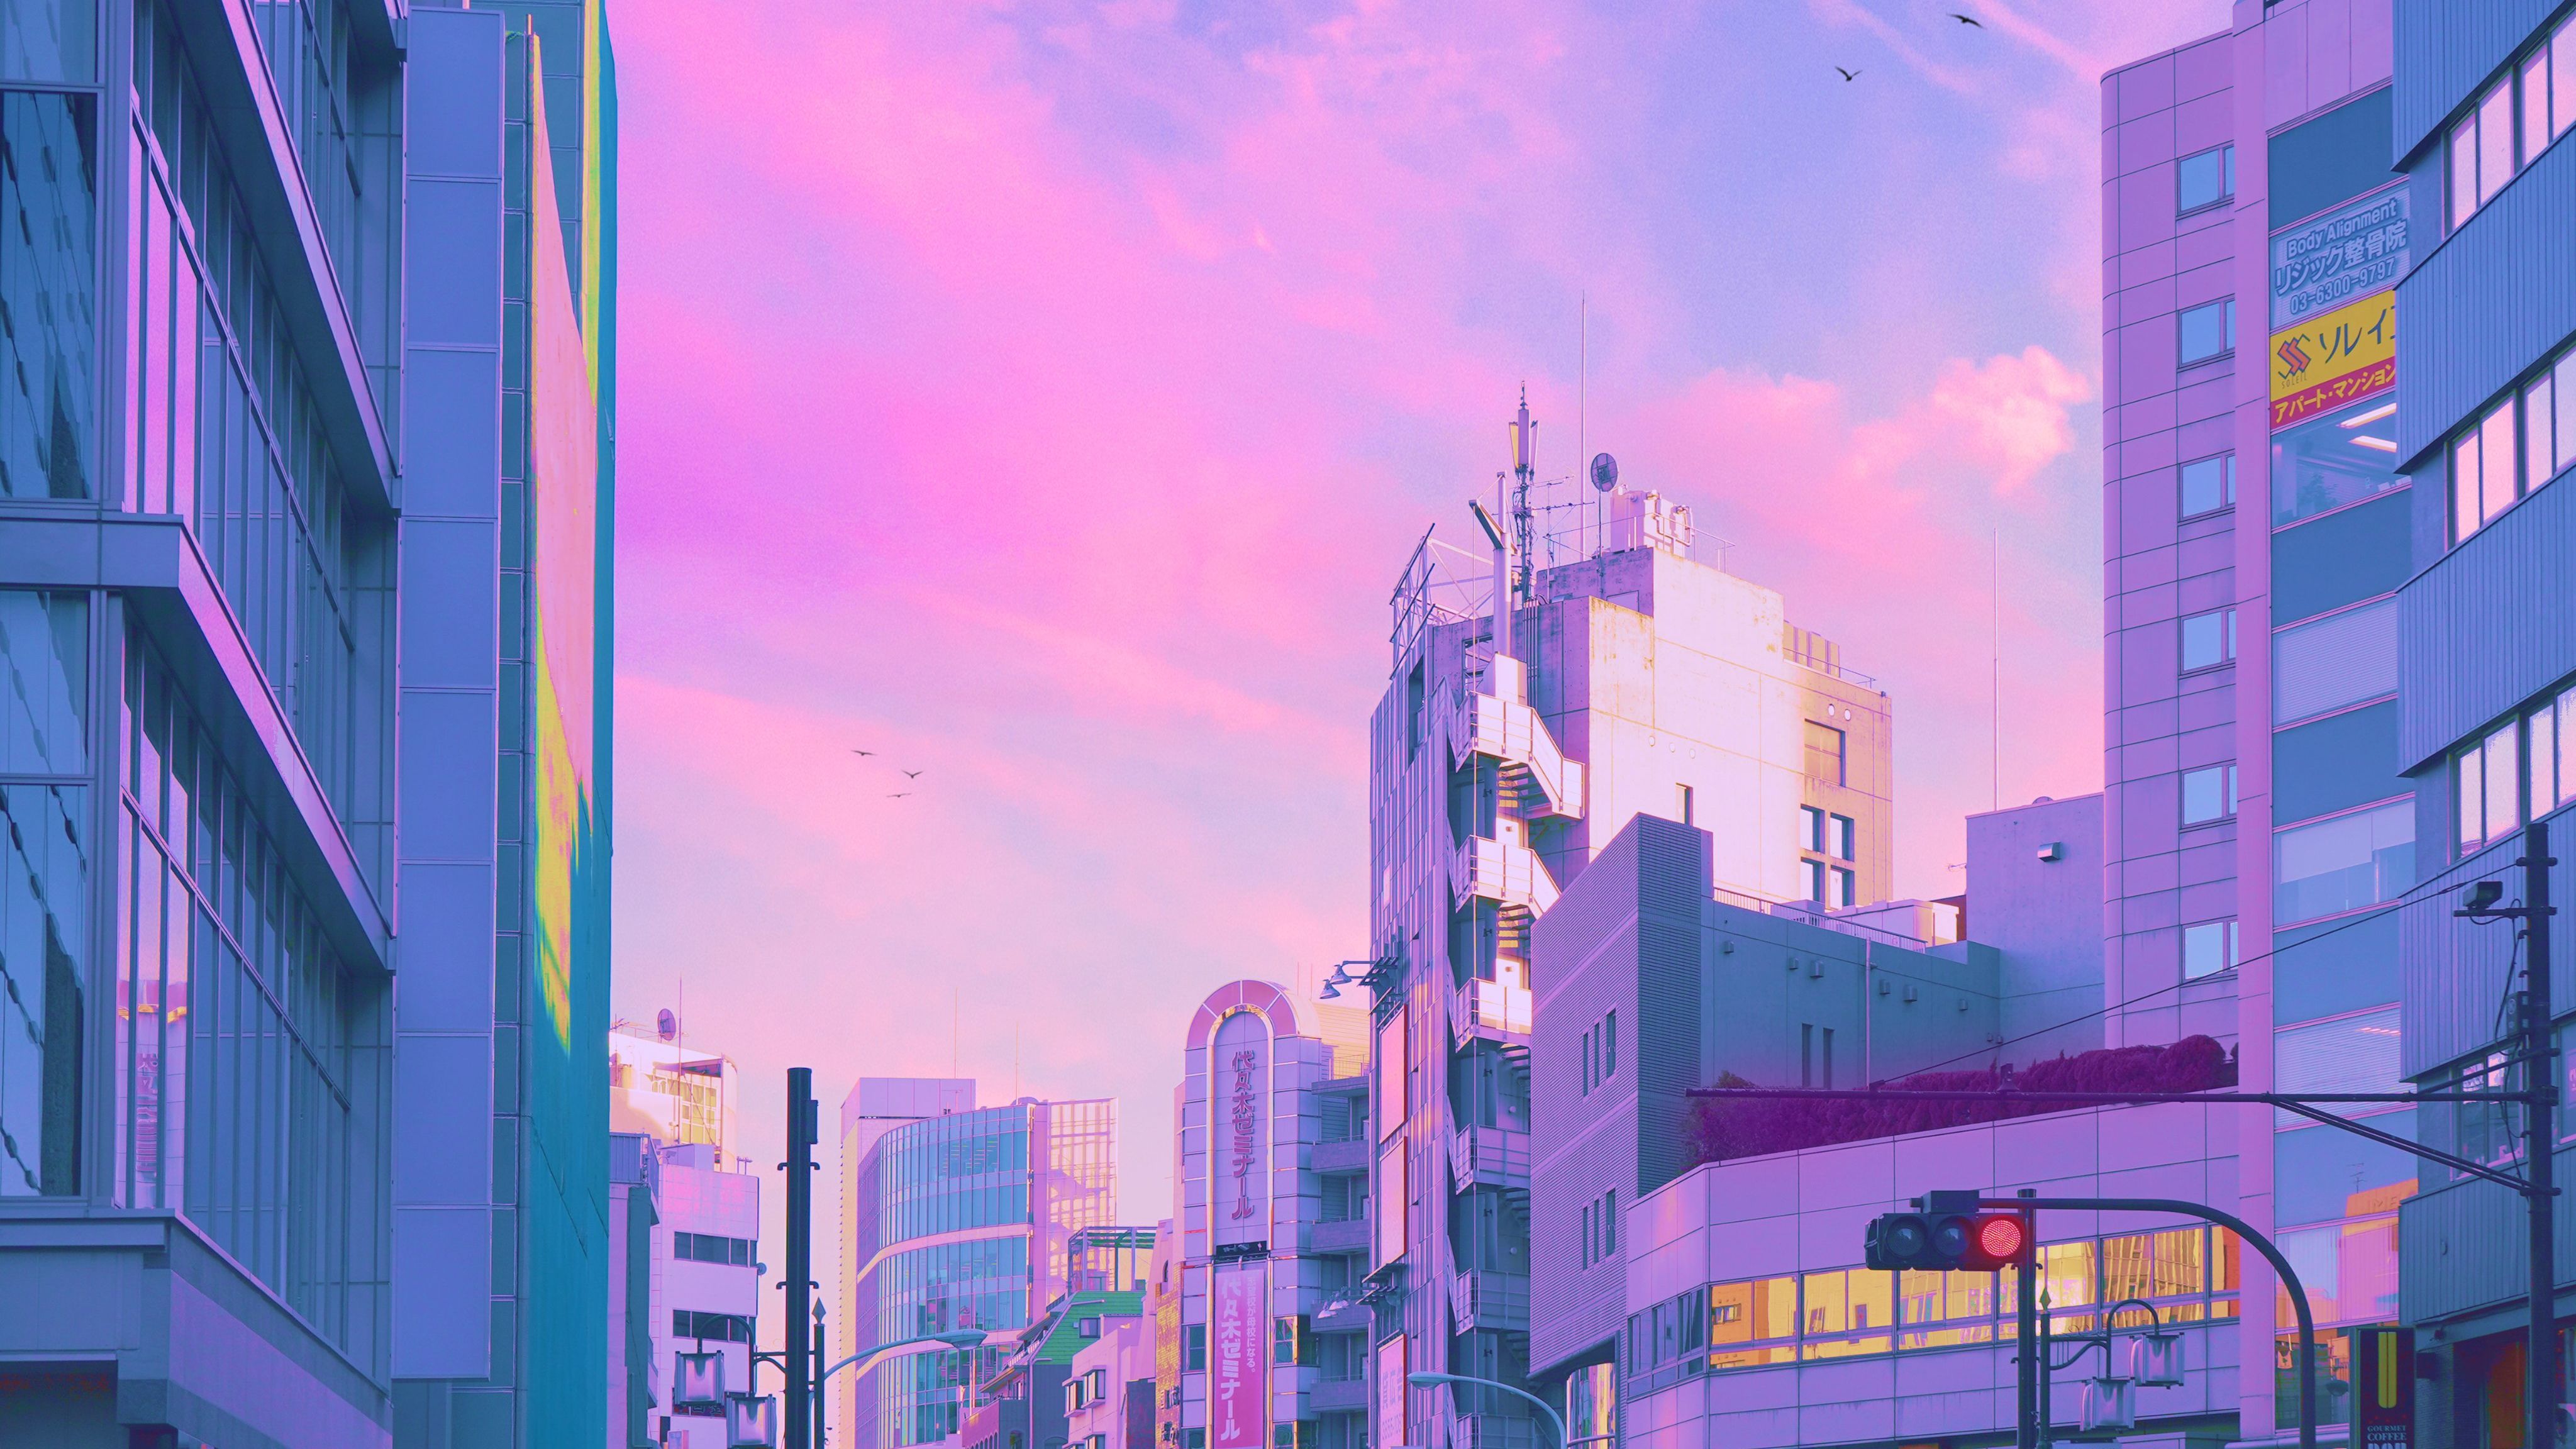 Aesthetic anime city wallpaper 2560x1440 for your phone - Cityscape, Tokyo